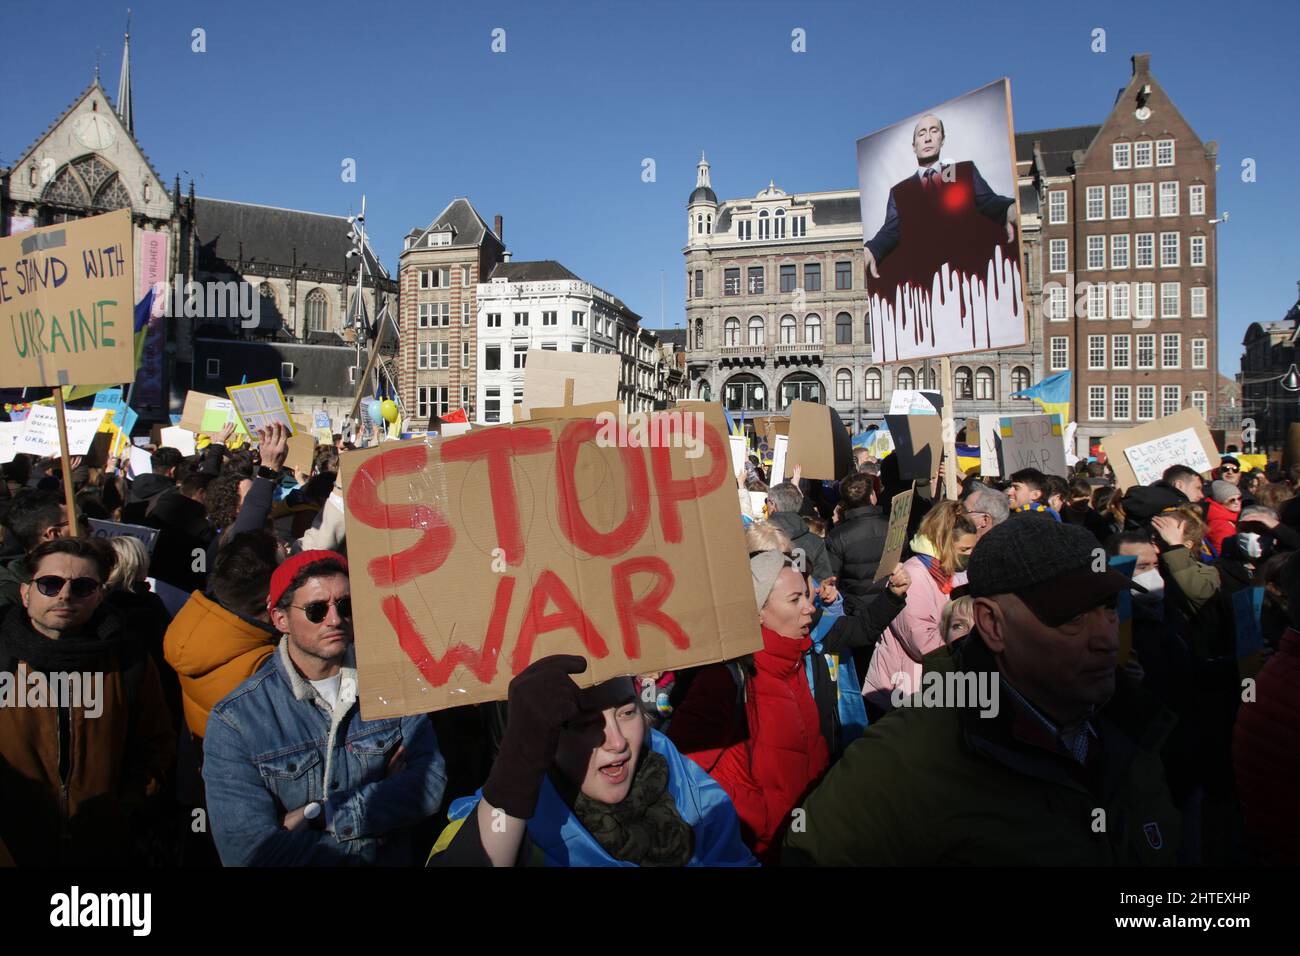 Thousands demonstrators protest against the Russian military invasion of Ukraine at the Dam Square on February 27, 2022 in Amsterdam,Netherlands. Stock Photo